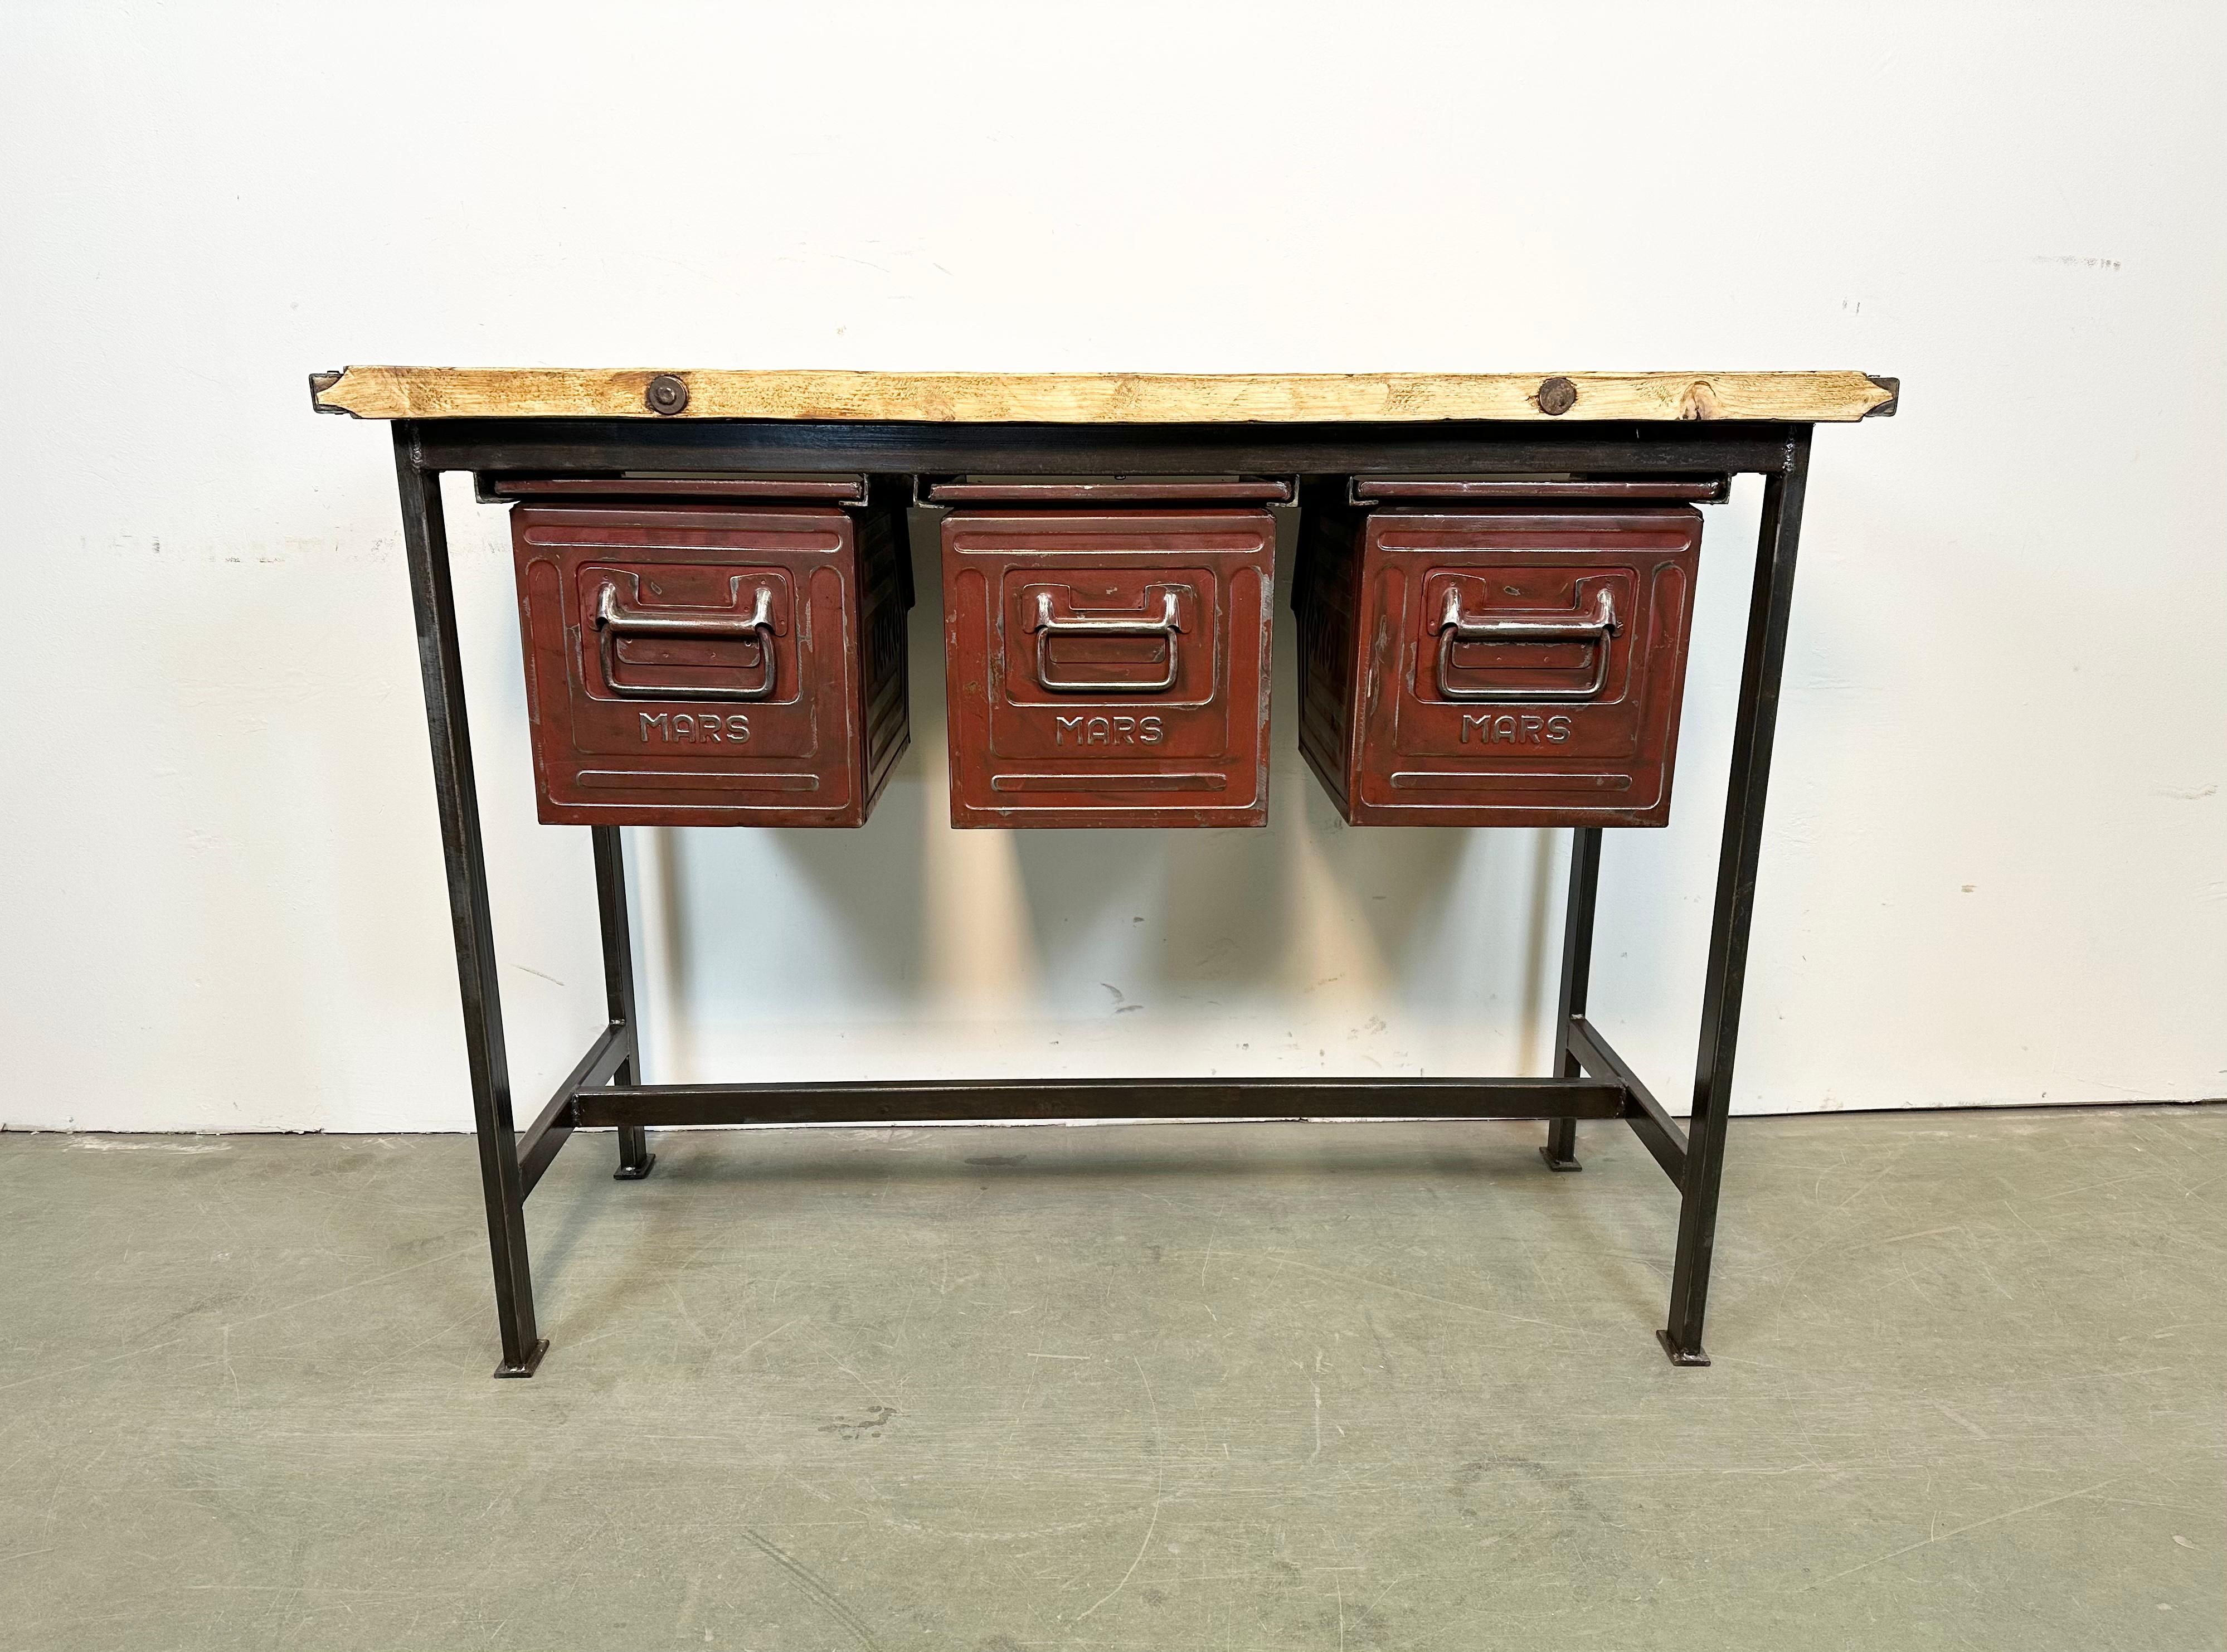 Vintage industrial worktable from the 1960s. It features a black iron construction, solid wooden plate and three red iron drawers. Weight: 41 kg.
Drawer dimensions:
Width: 28 cm
Depth: 39 cm
Height: 30 cm